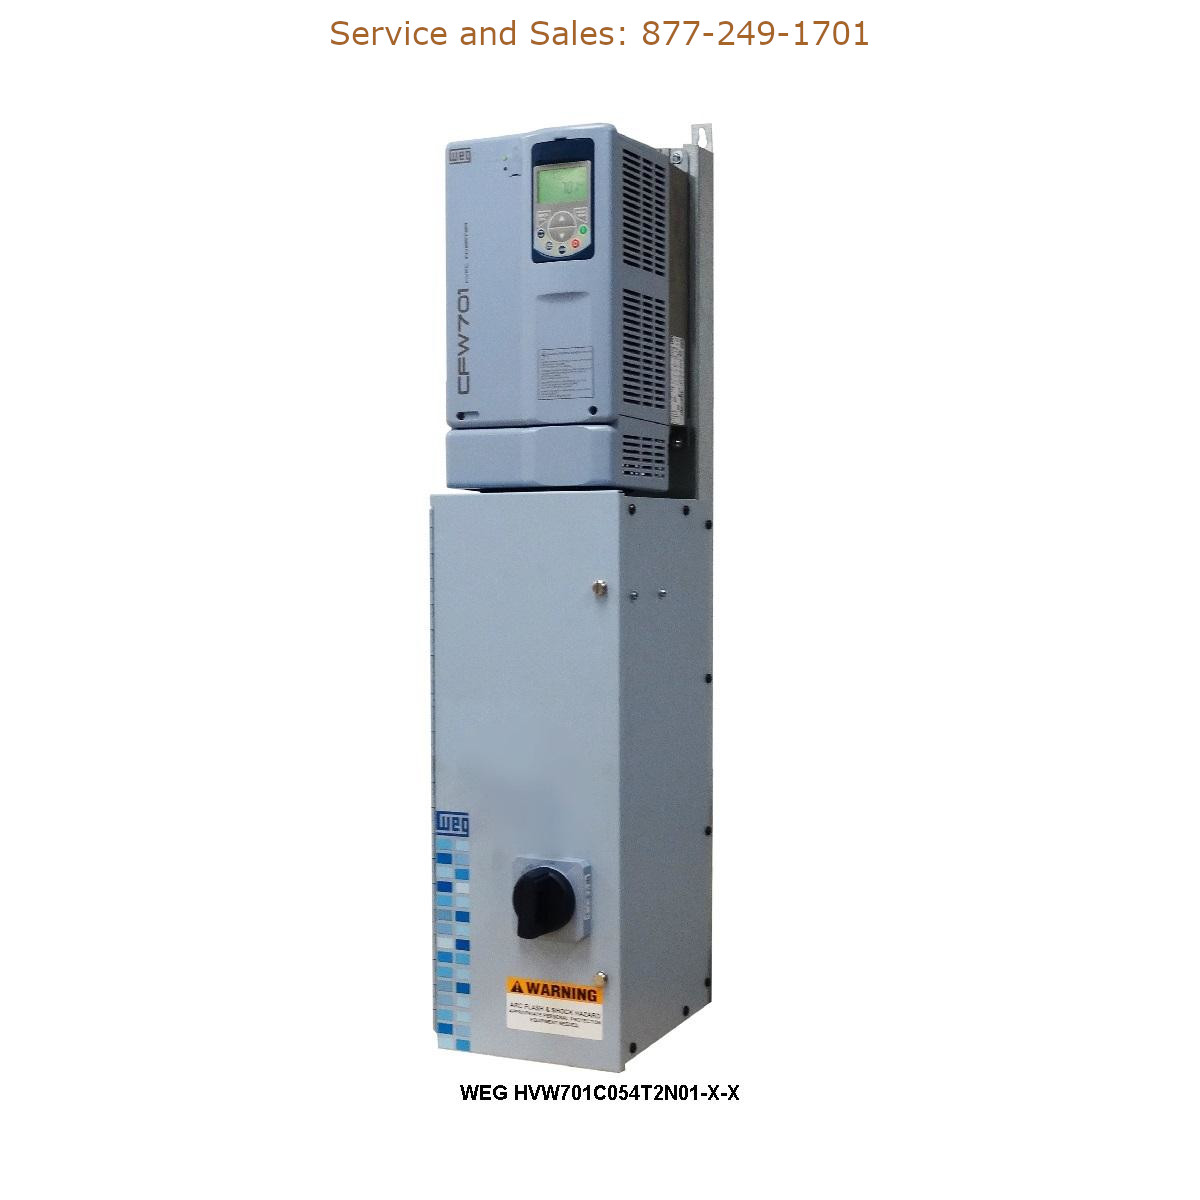 WEG HVW701C054T2N01-X-X WEG Model Number HVW701C054T2N01-X-X WEG Drives, Variable Speed Drives Repair Service, Troubleshooting, Replacement Parts https://gesrepair.com/wp-content/uploads/2022/WEG/WEG_HVW701C054T2N01-X-X_Drives_Variable_Speed_Drives.jpg